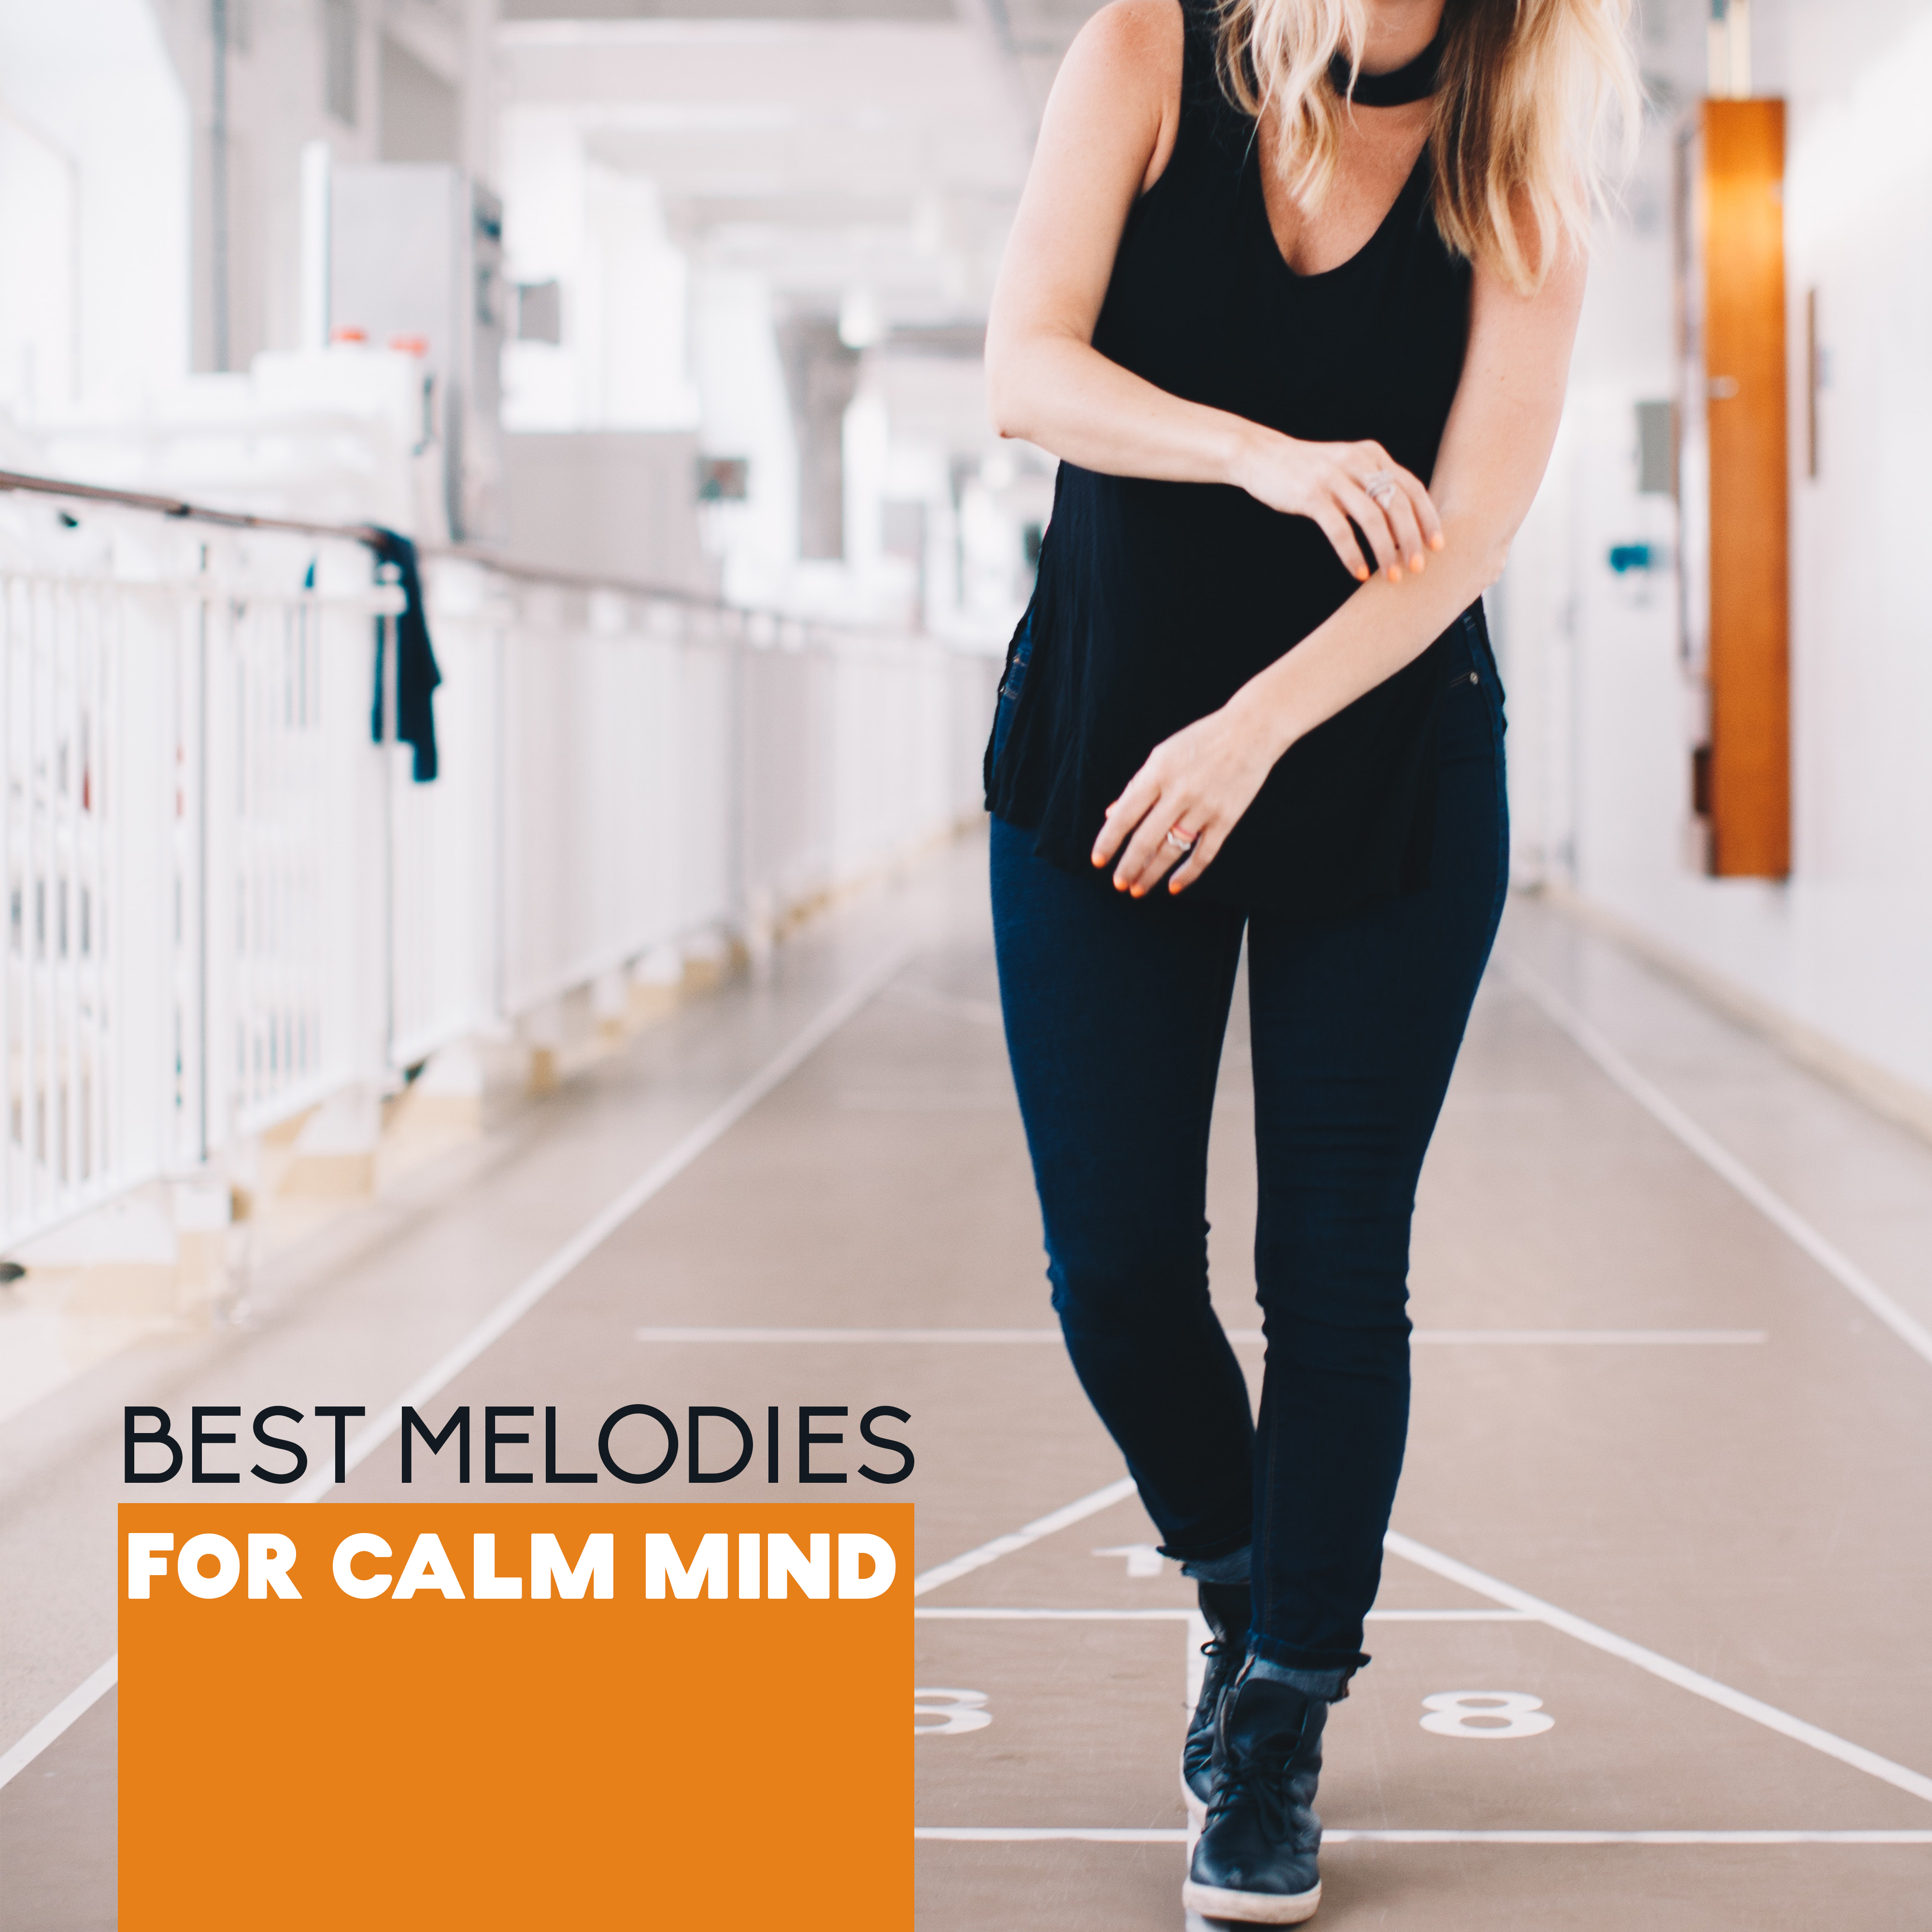 Best Melodies for Calm Mind